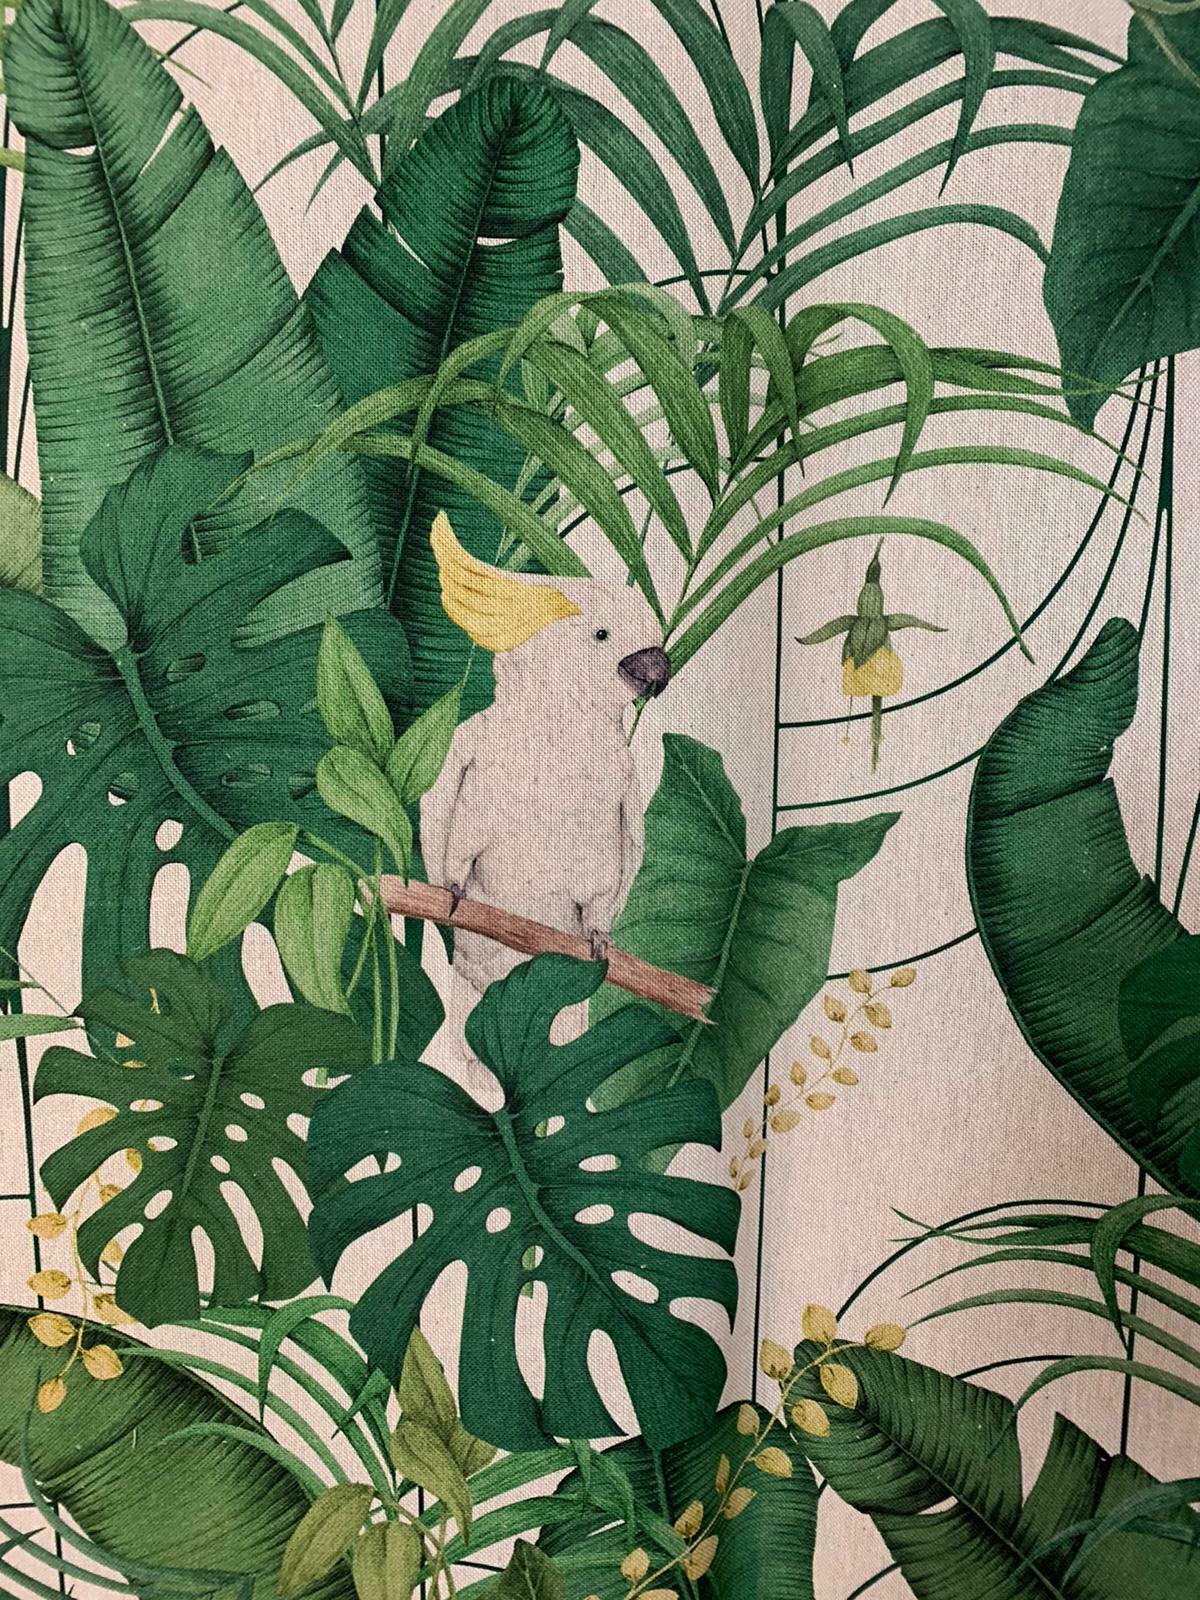 Royal White Cockatoo Green Fern Leaves Parrots Printed Cotton Fabric by Meter